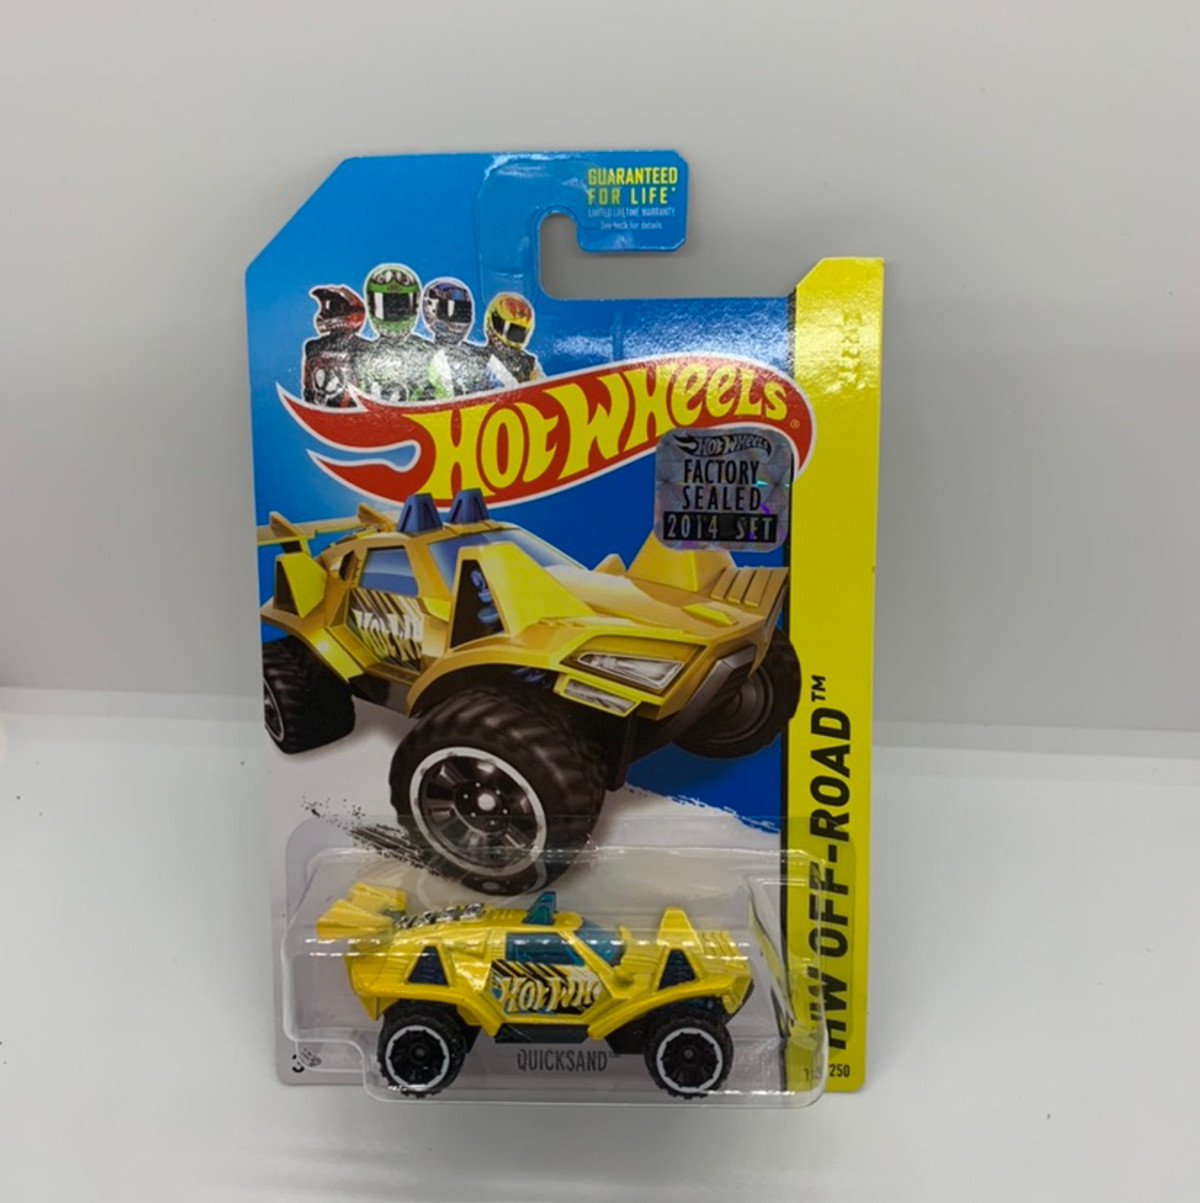 2014 Hot wheels Quicksand Yellow Version With Factory Set Sticker 